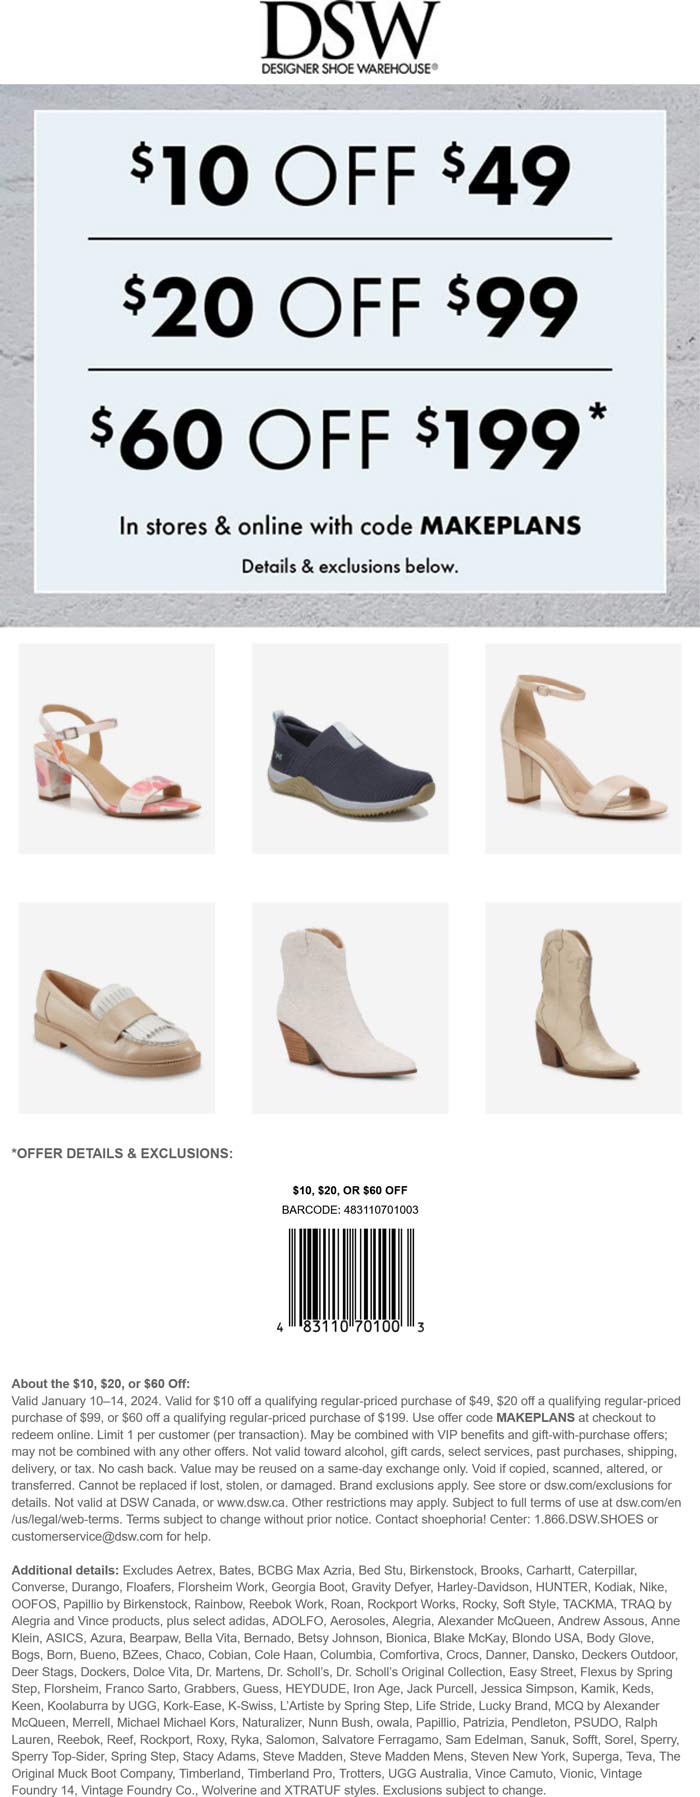 DSW stores Coupon  $10-$60 off $49+ at DSW shoes, or online via promo code MAKEPLANS #dsw 